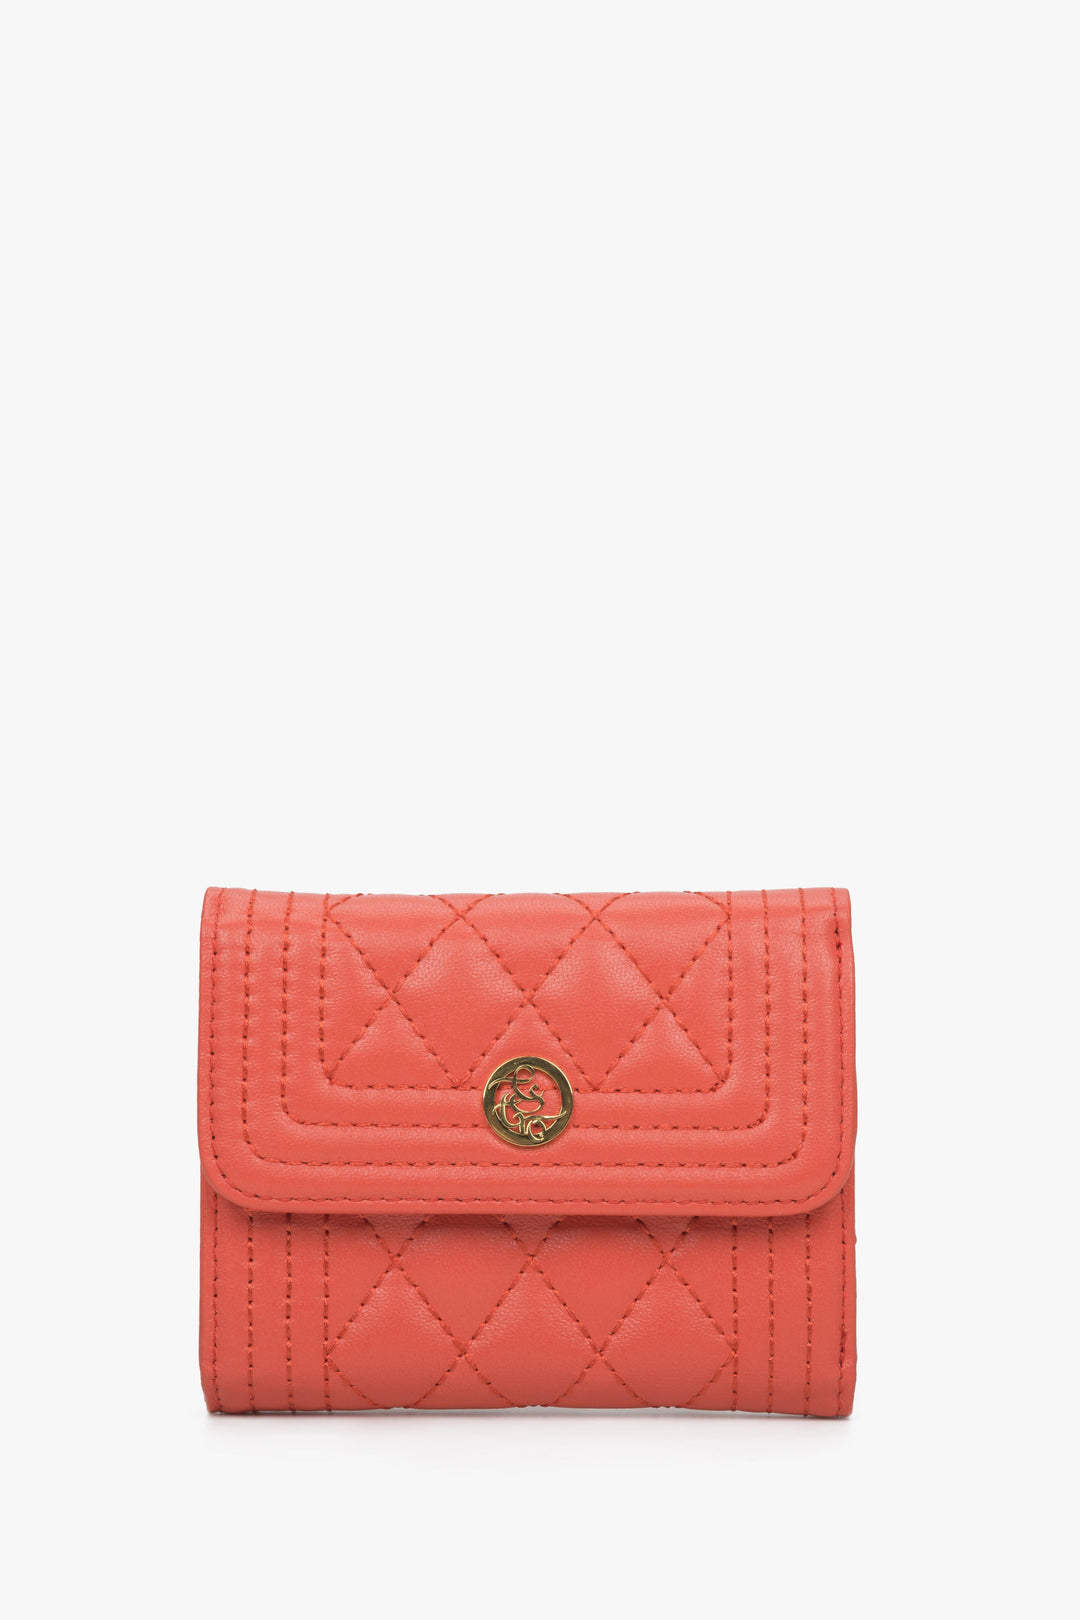 Women's Tri-Fold Red Wallet with Golden Accents Estro ER00114480.